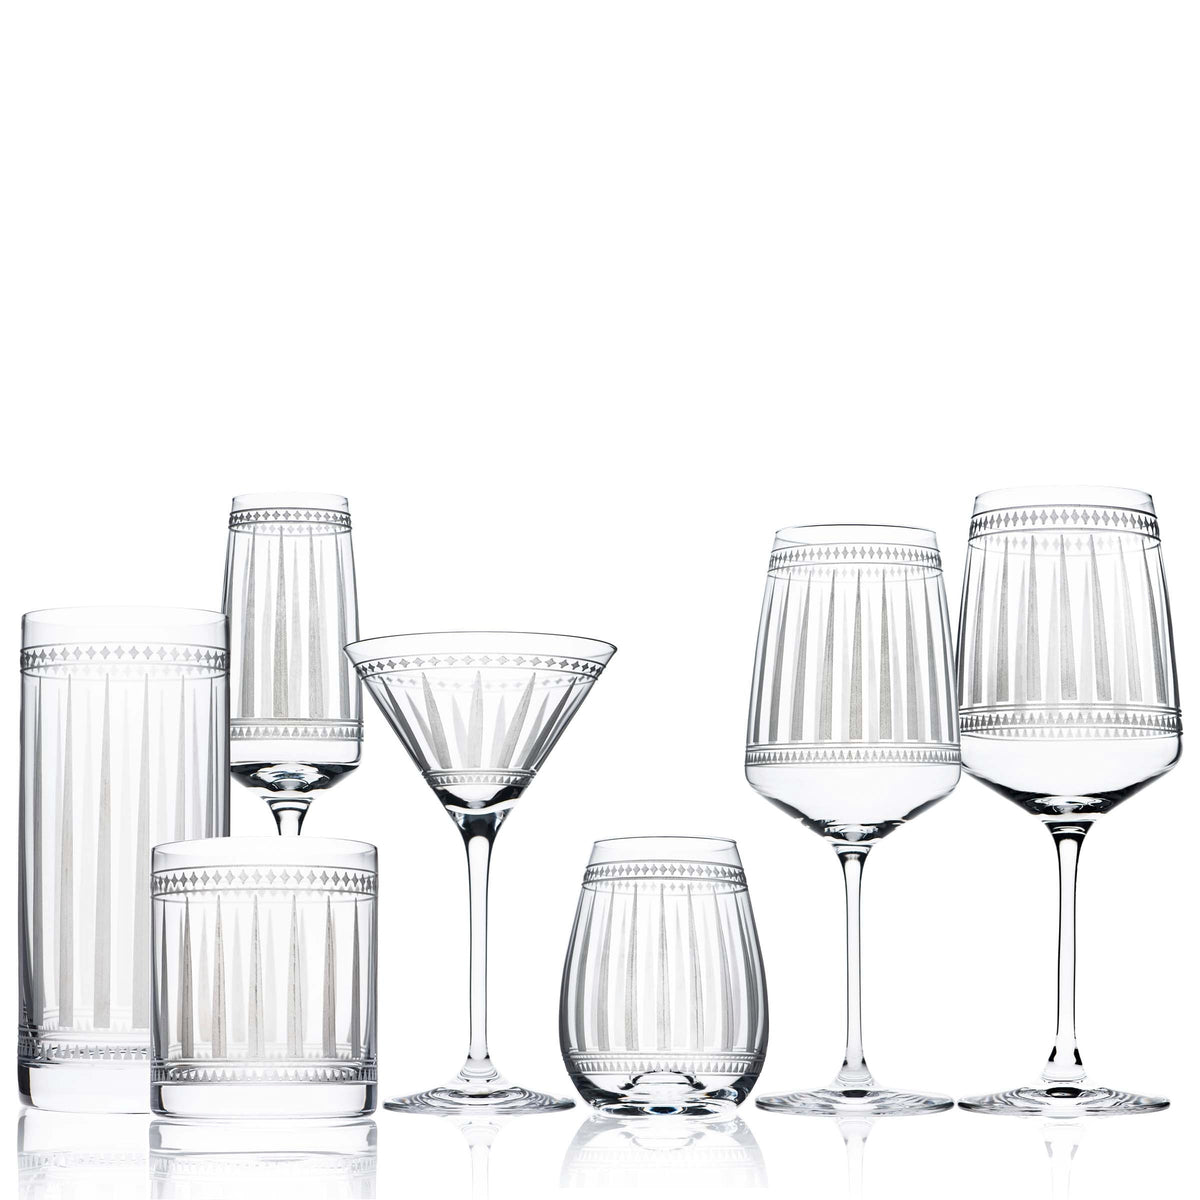 A set of Marrakech Stemless Wine Glasses featuring graphic patterns displayed against a white background, by Caskata Artisanal Home.